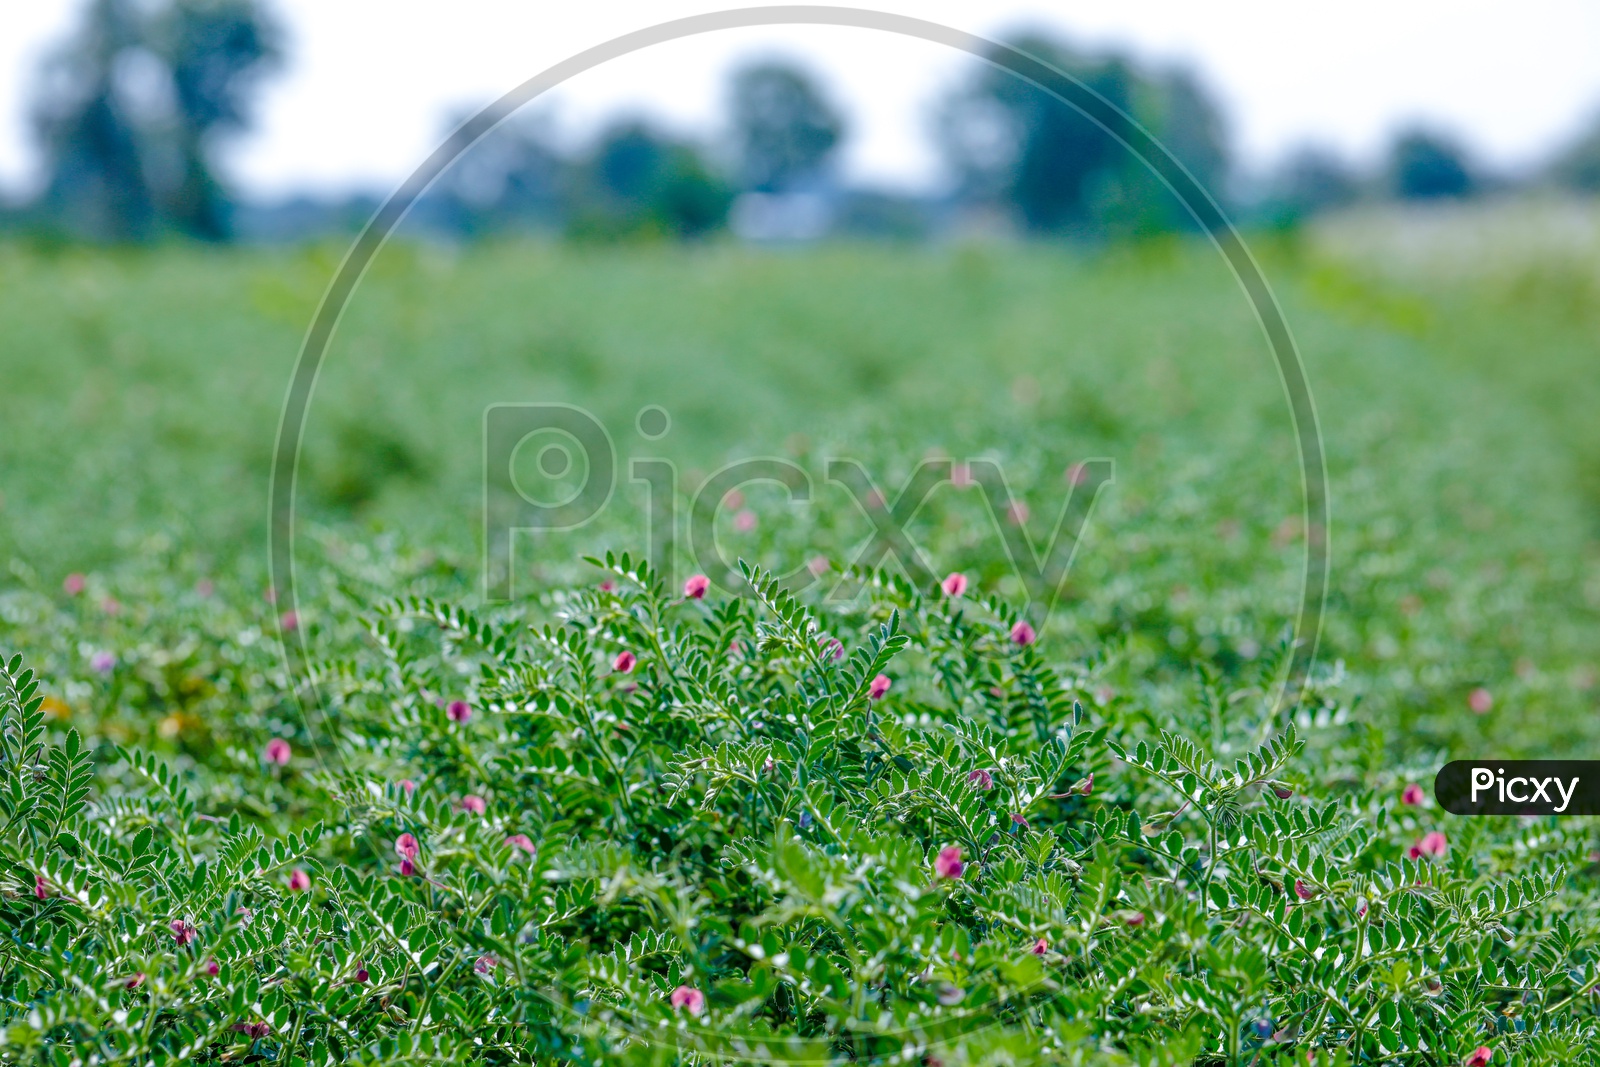 Fresh Green Chickpeas Field   , Chickpeas Also Known as Harbara or Harbhara or Cicer